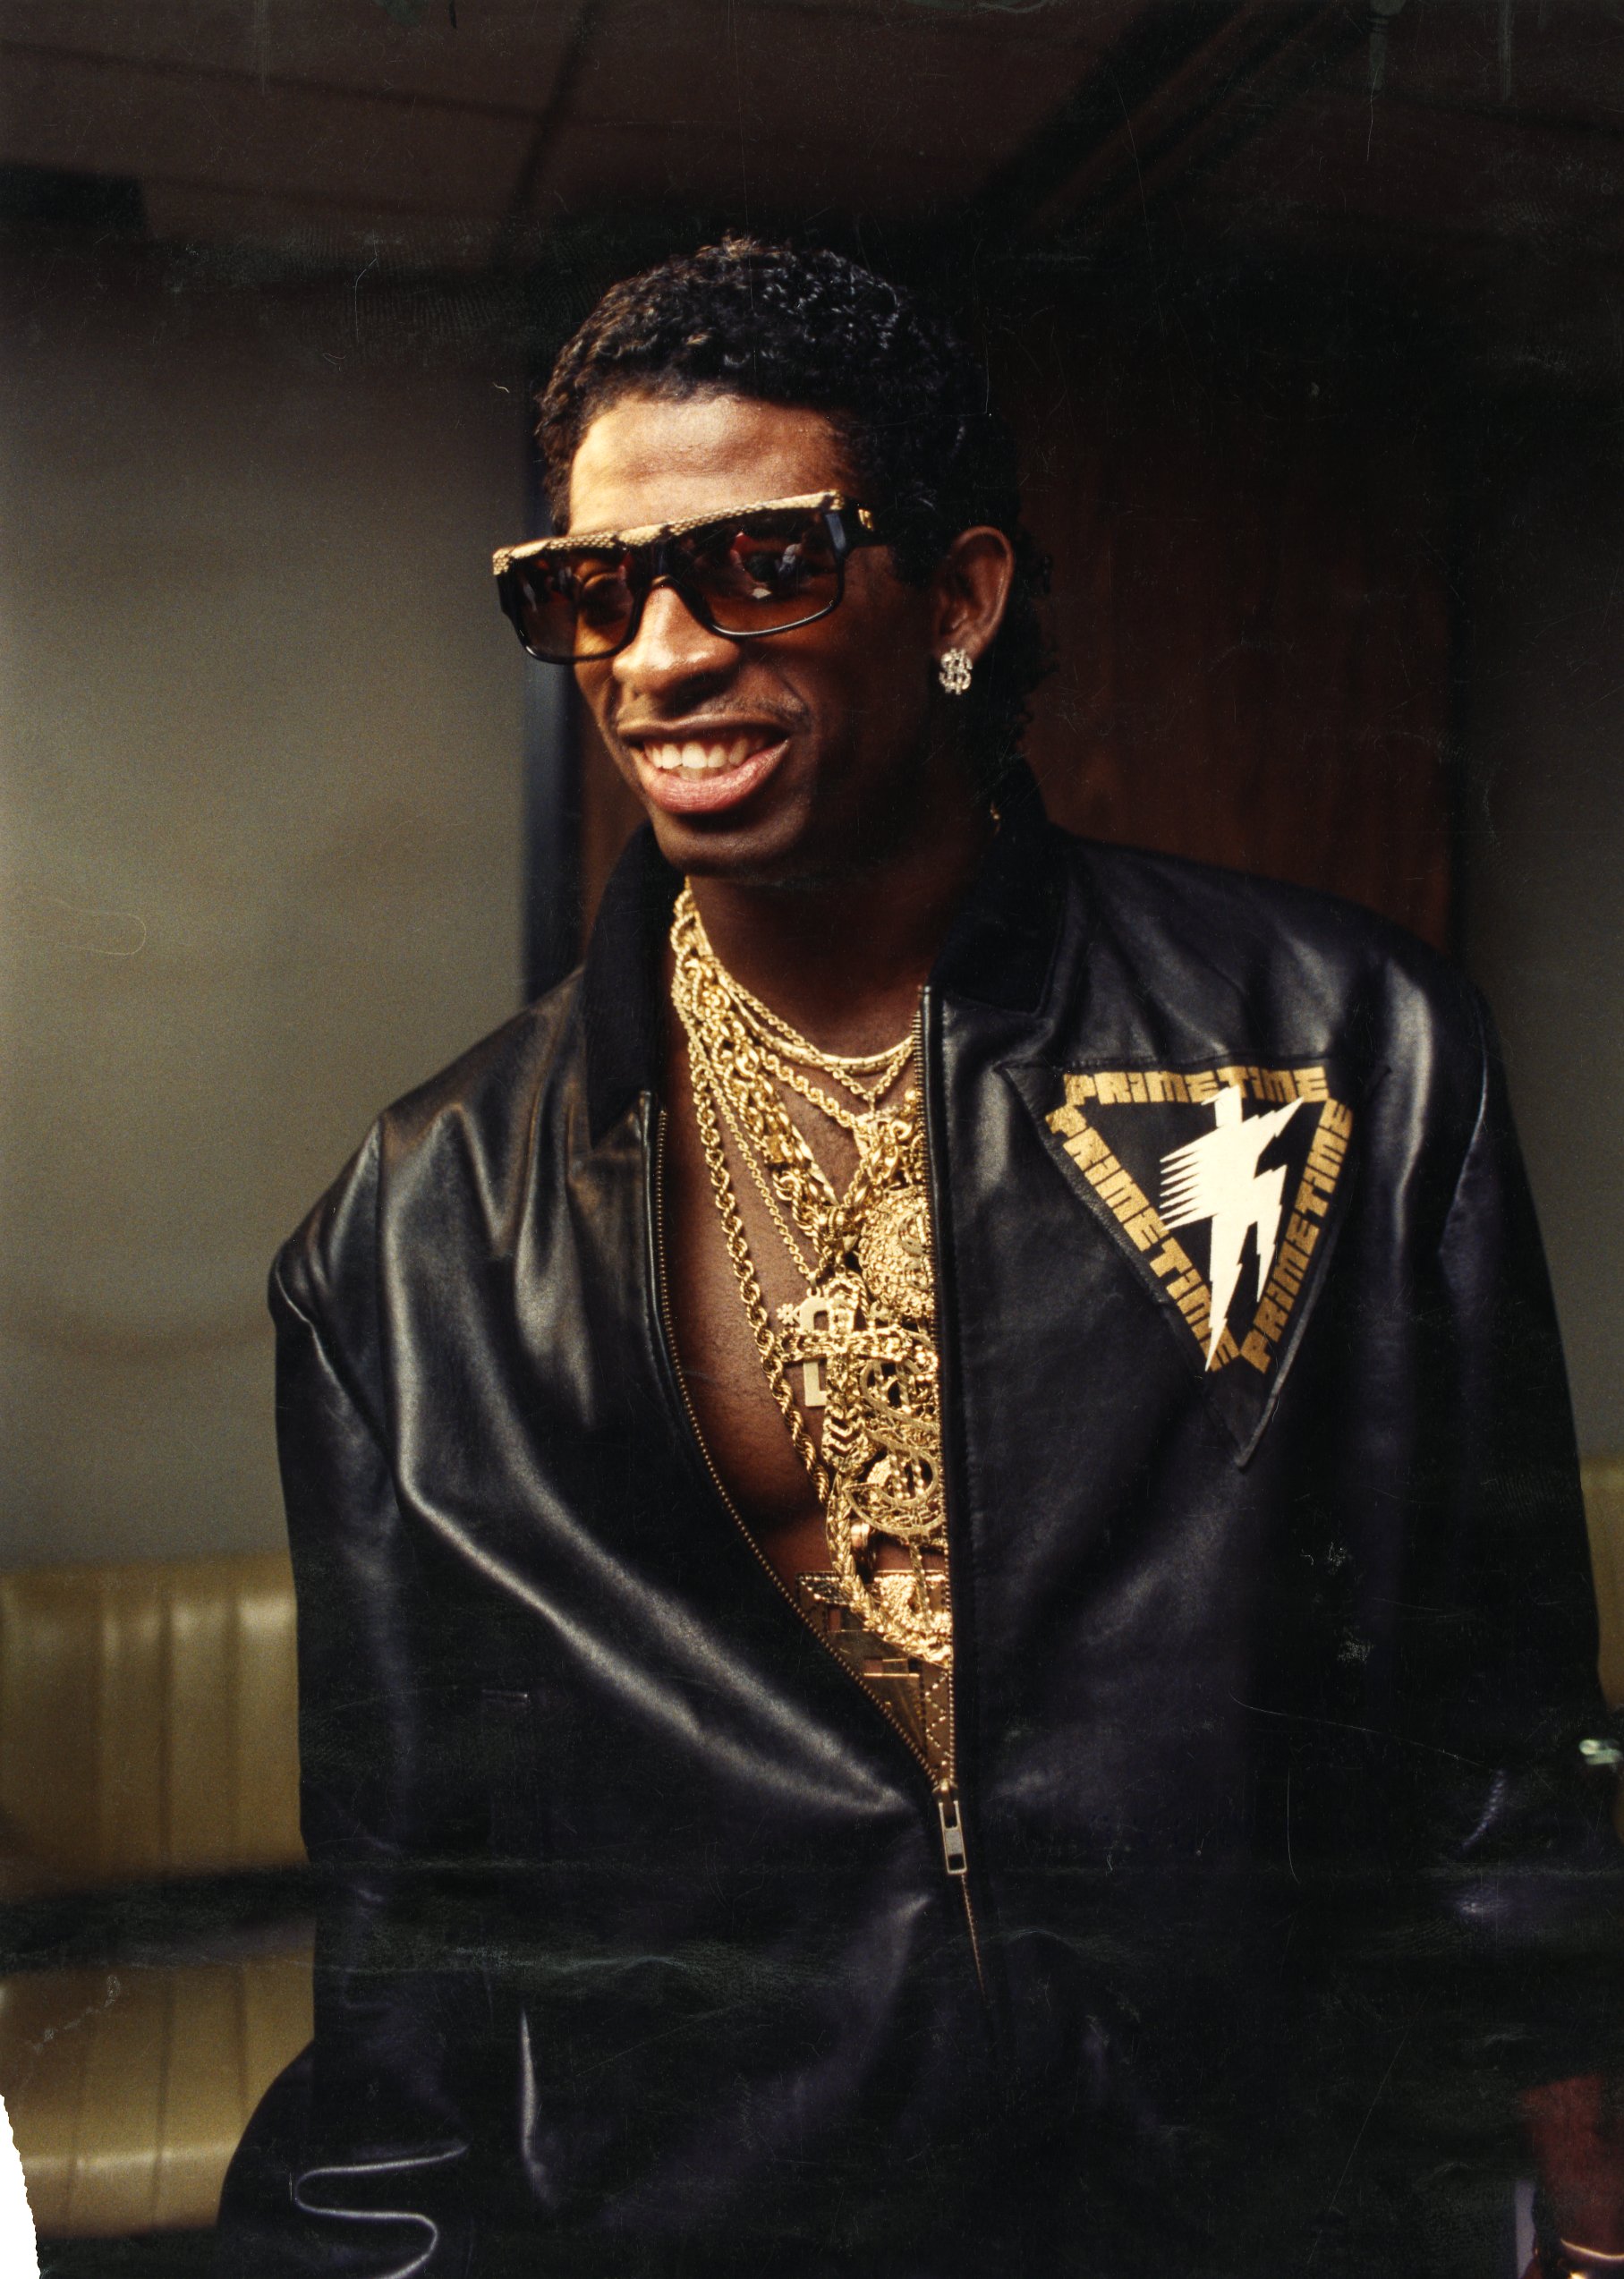 The hair, the jewelry, the gear — and the swag he rocked it with: Deion  Sanders, icon of prime-time style